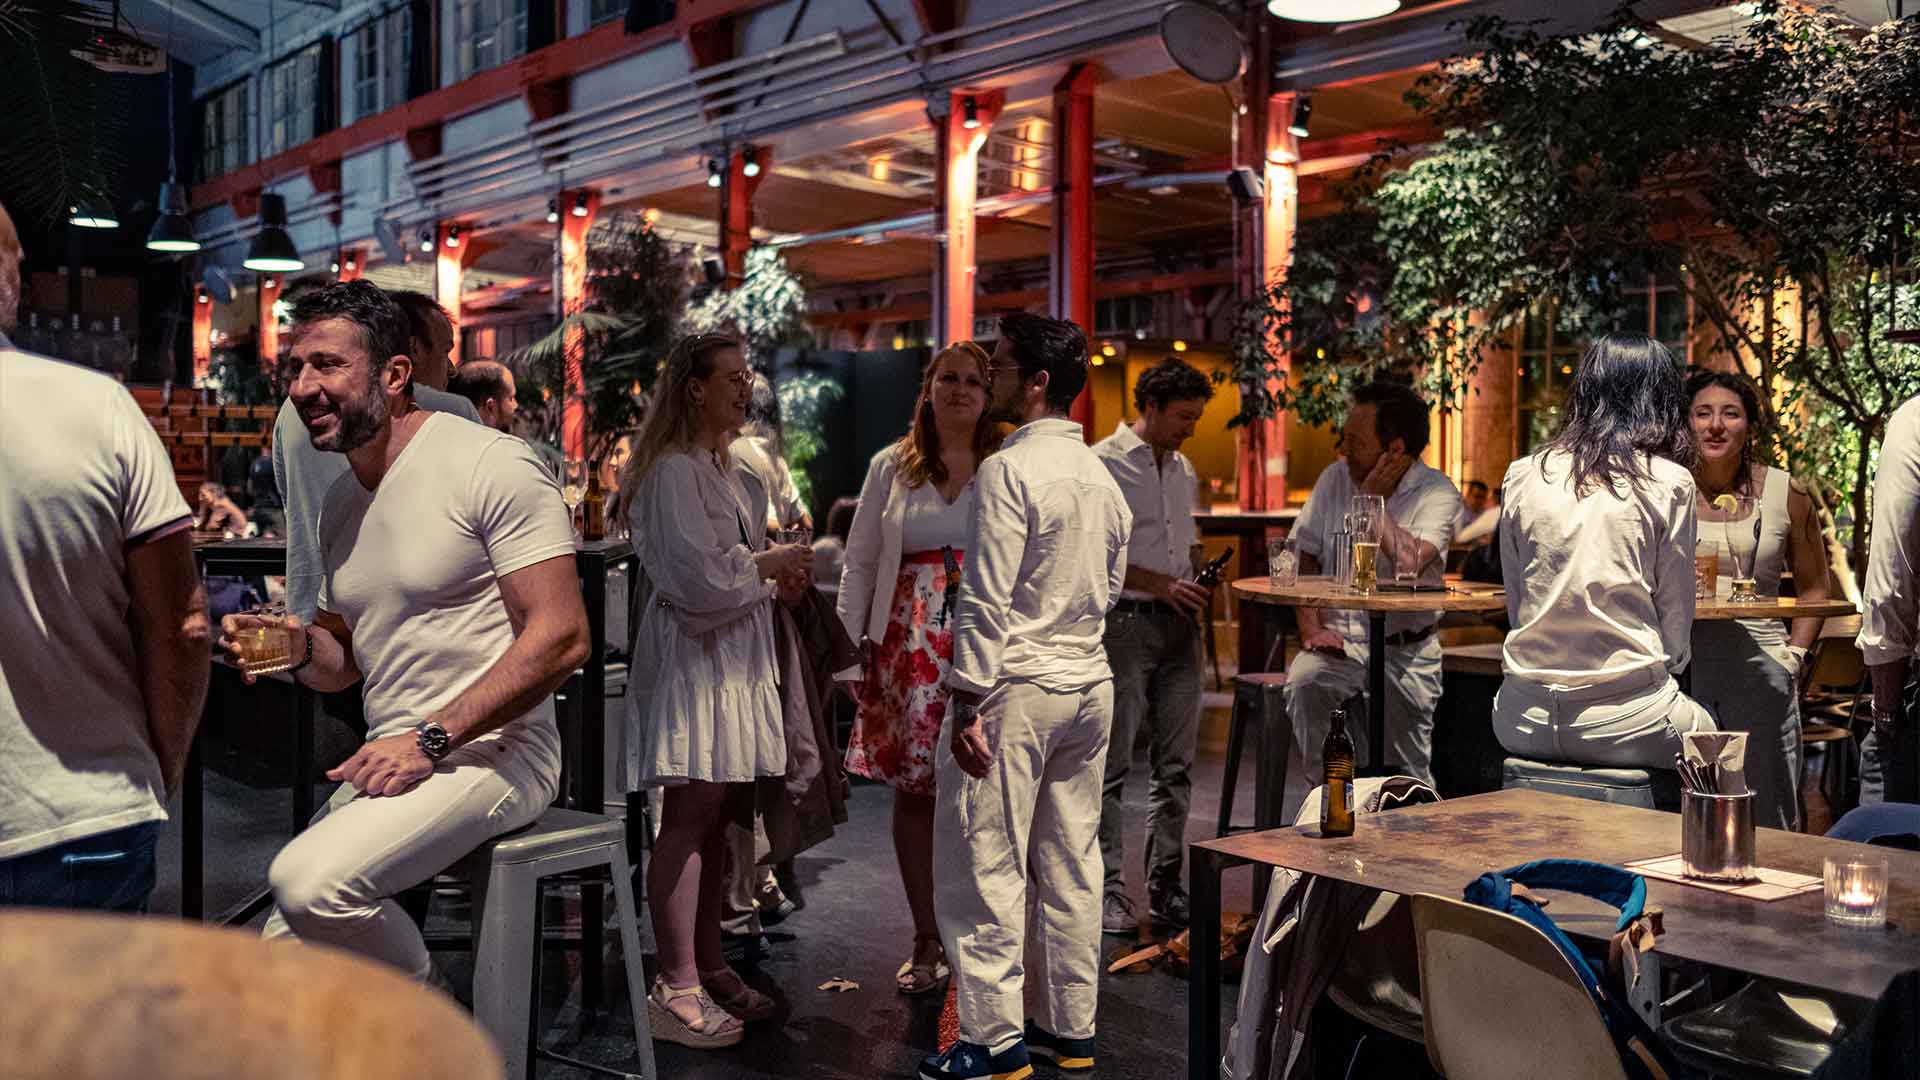 Patrons socializing in an outdoor evening setting at a lively bar with industrial decor.